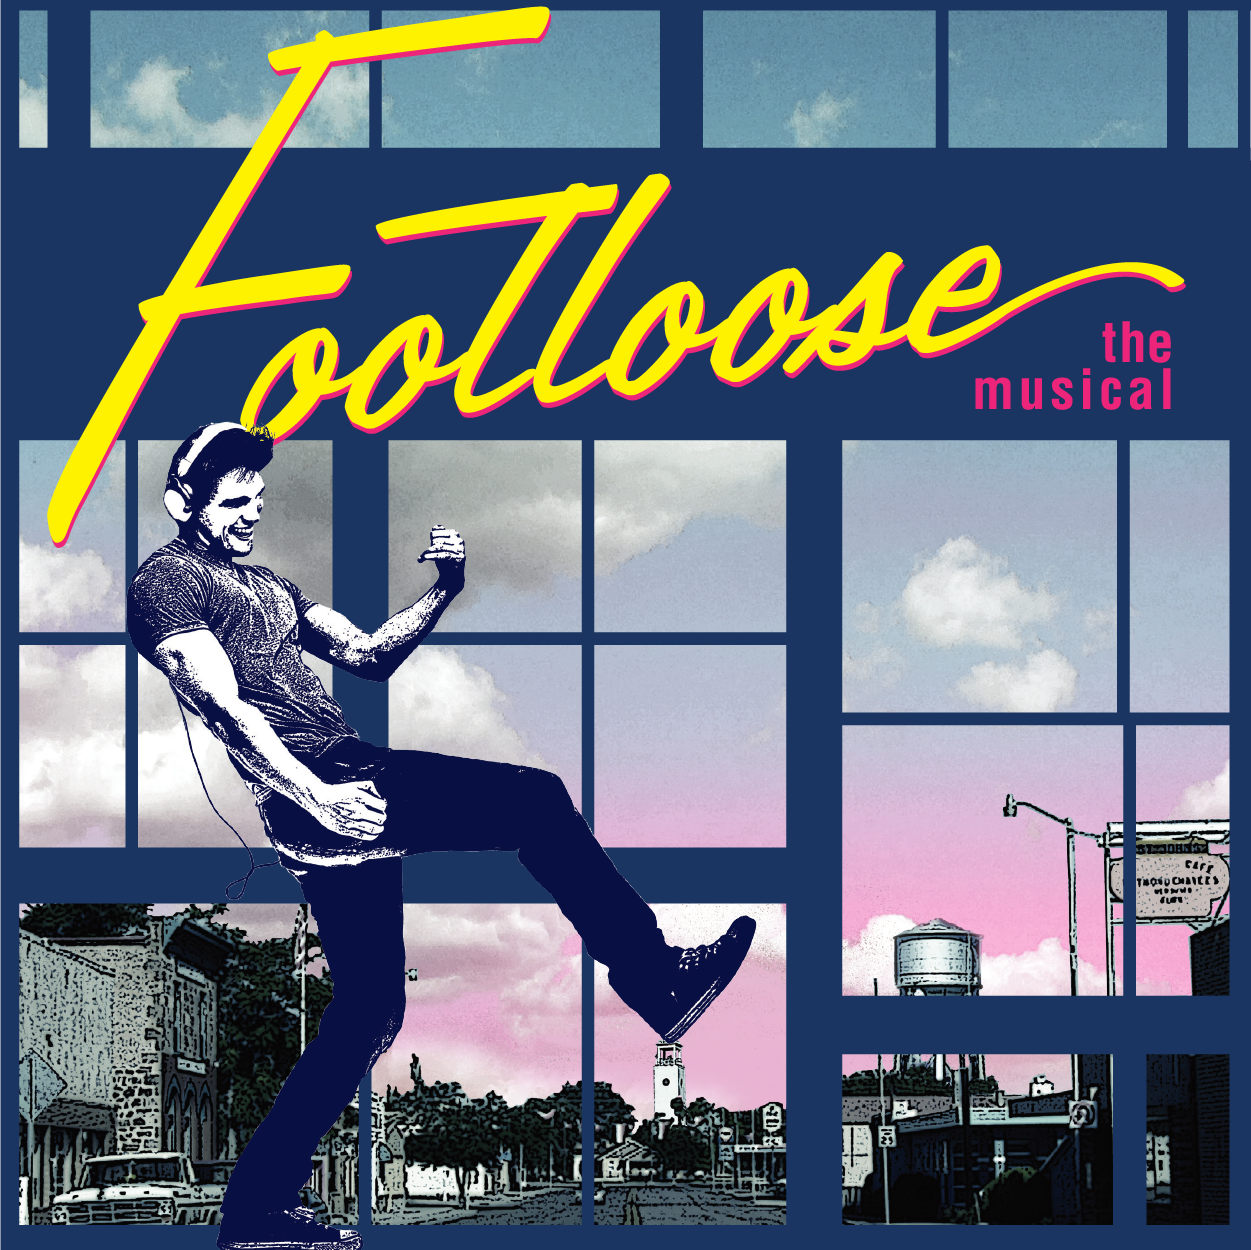 NEW Spring Show! Footloose The Musical!